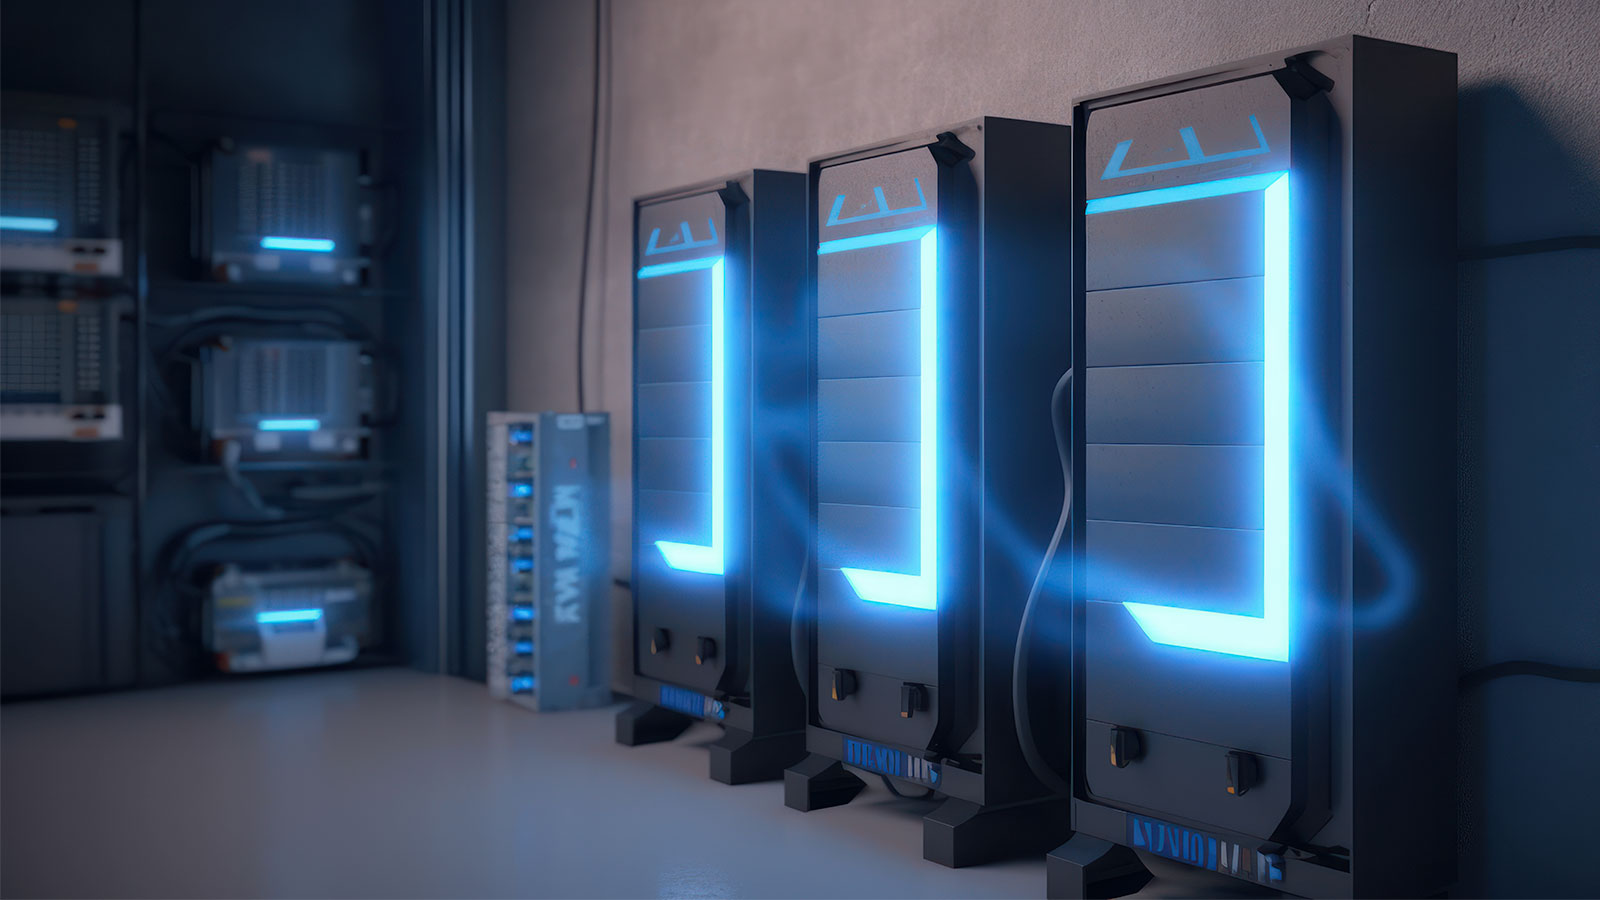 Battery energy storage systems can be turbocharged through the use of smart software.